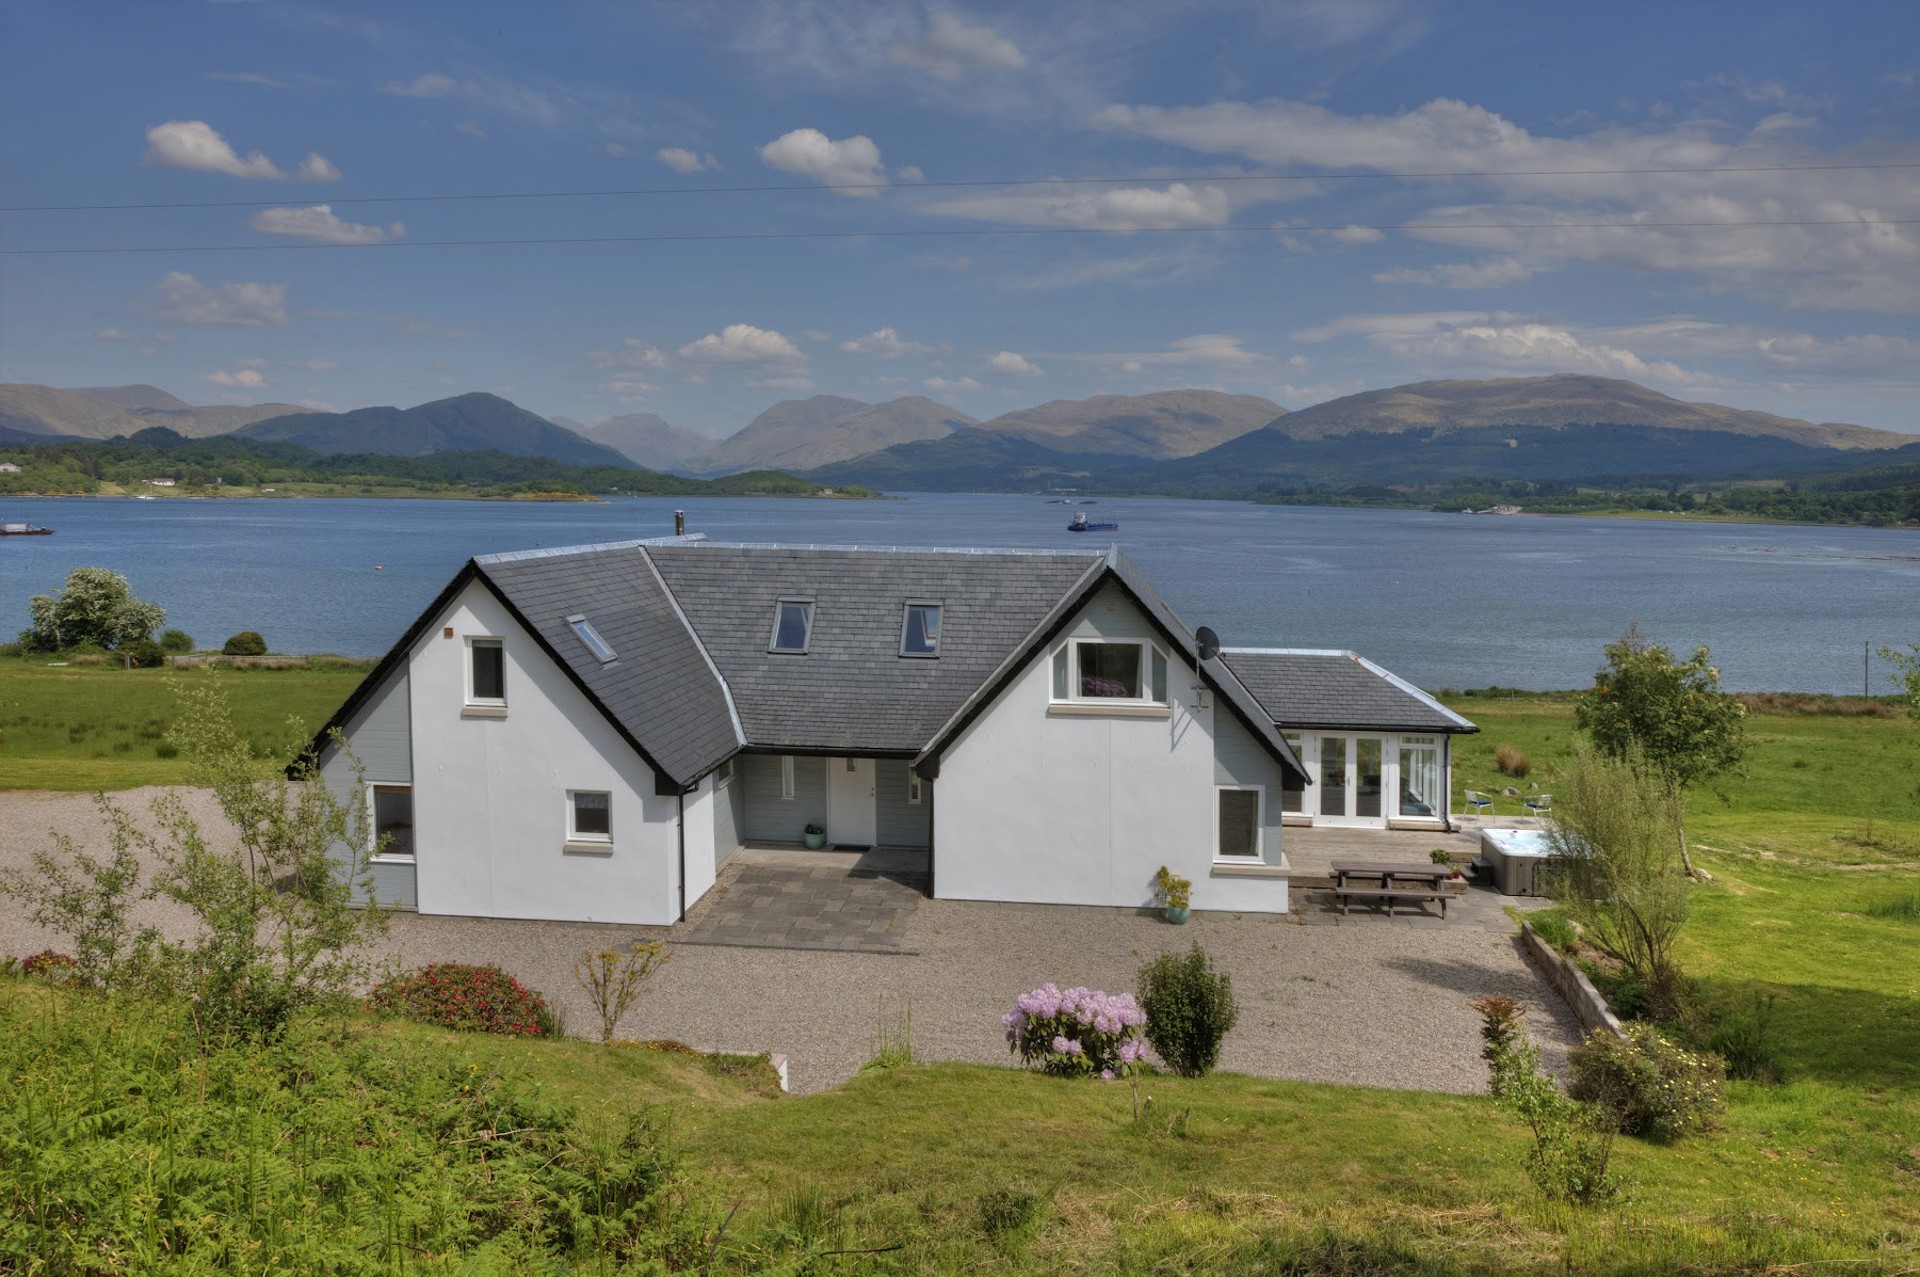 Background image - 0i5d9226_house_and_loch_small.jpg